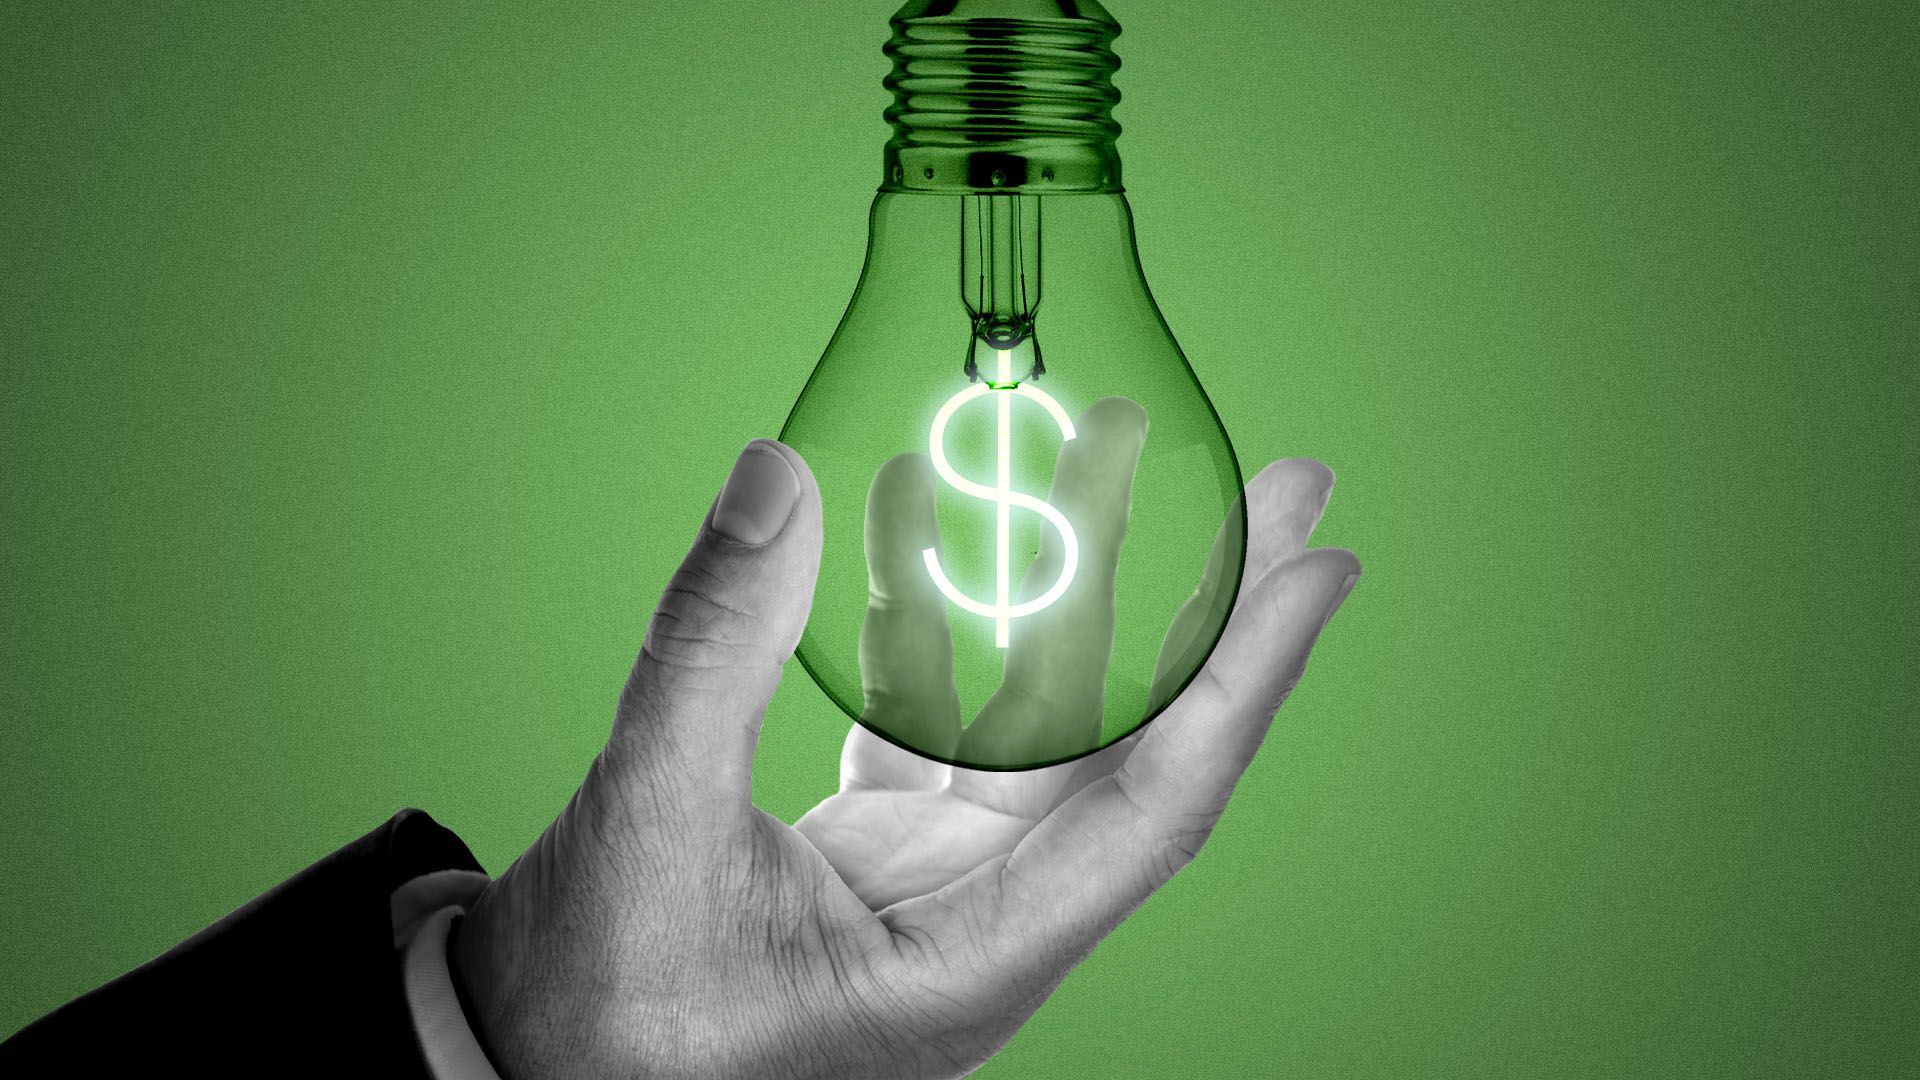 Illustration of a hand screwing in a lightbulb with a dollar sign in the middle.